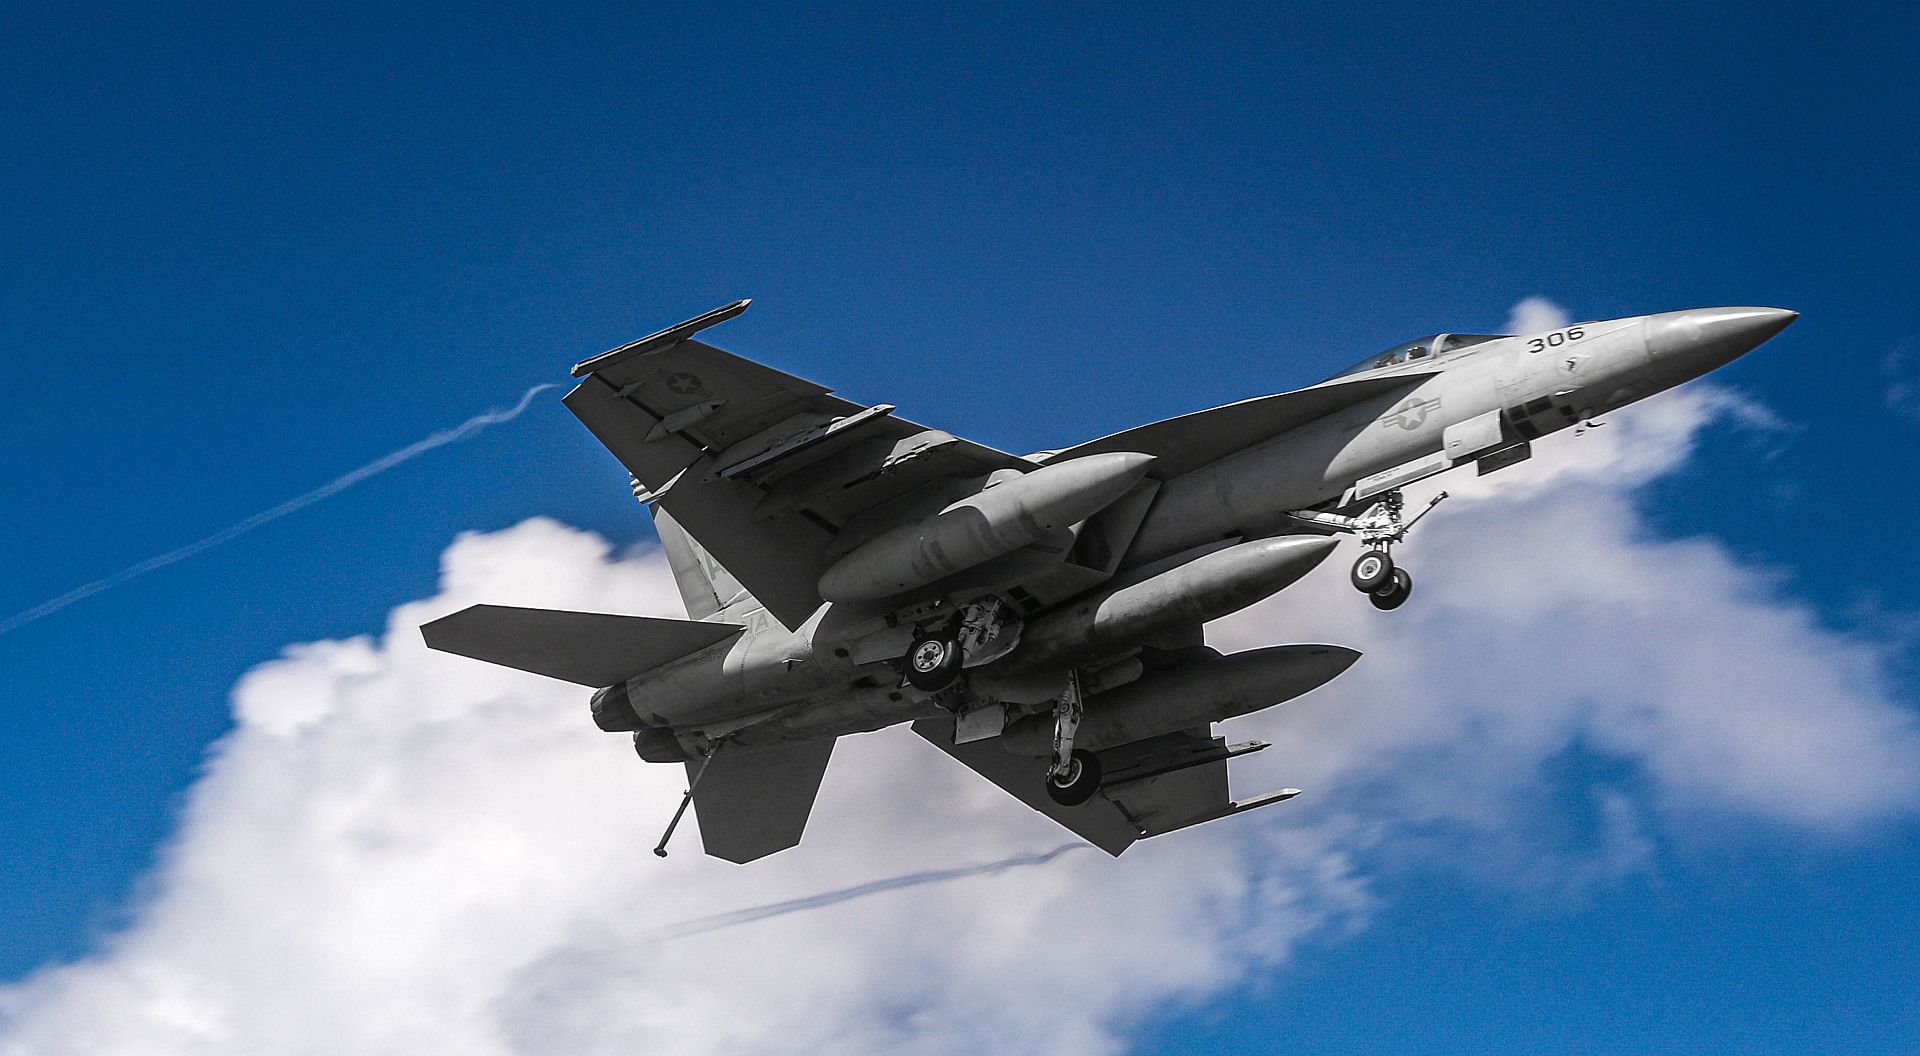 18E Super Hornet From The Kestrels Of Strike Fighter Squadron 137 Flies Over The Aircraft Carrier USS Nimitz